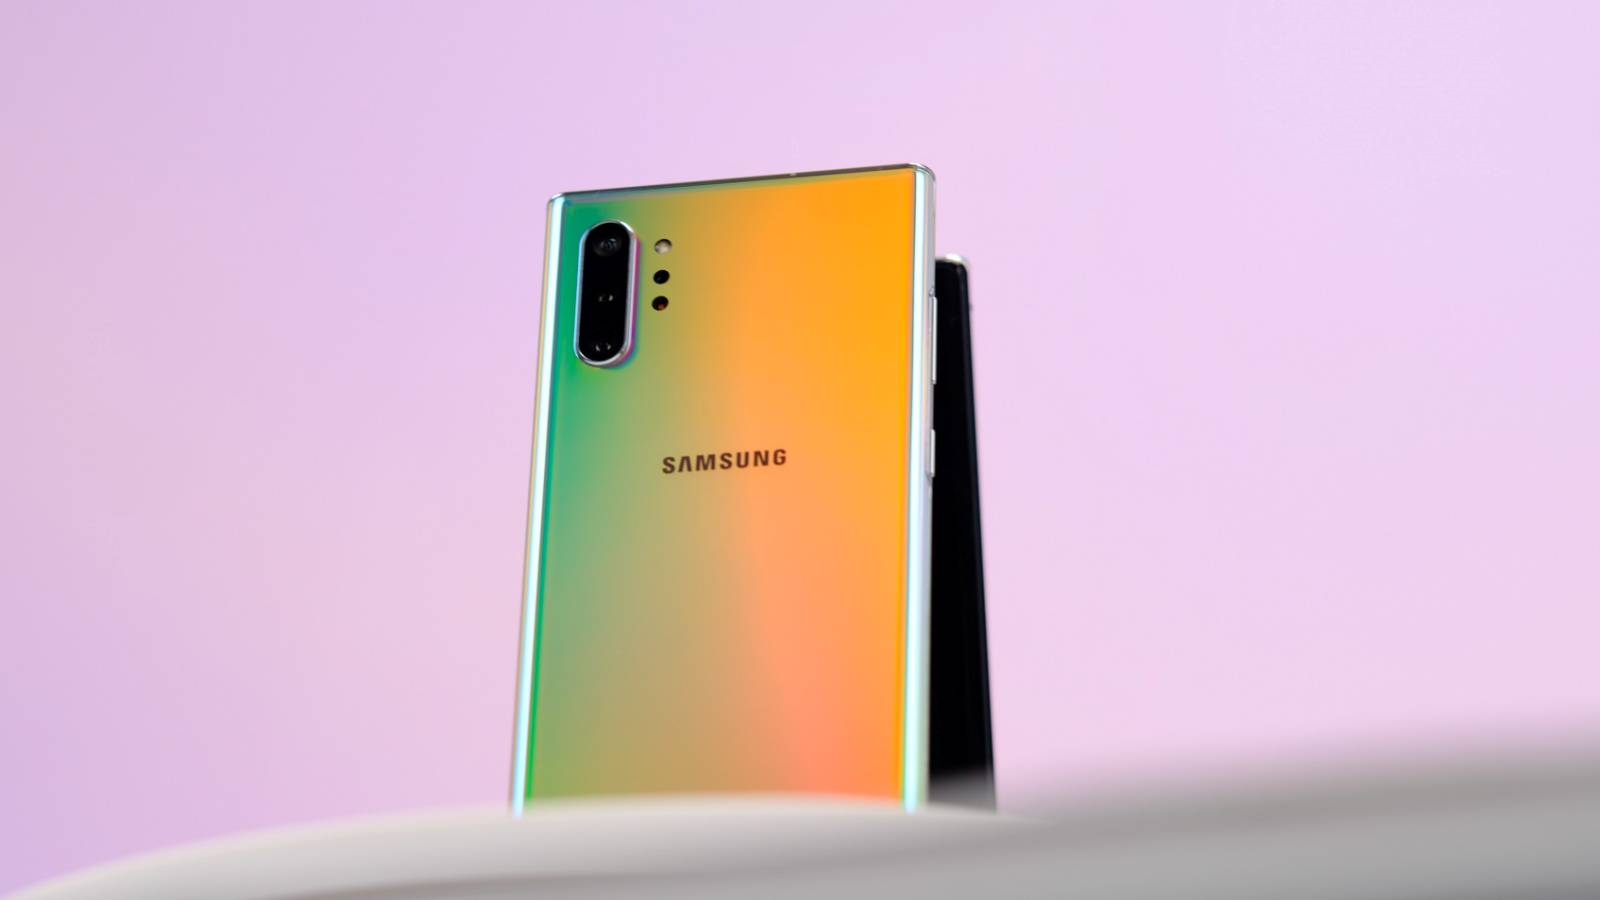 Samsung GALAXY S11. The first EXCLUSIVE News for Phones